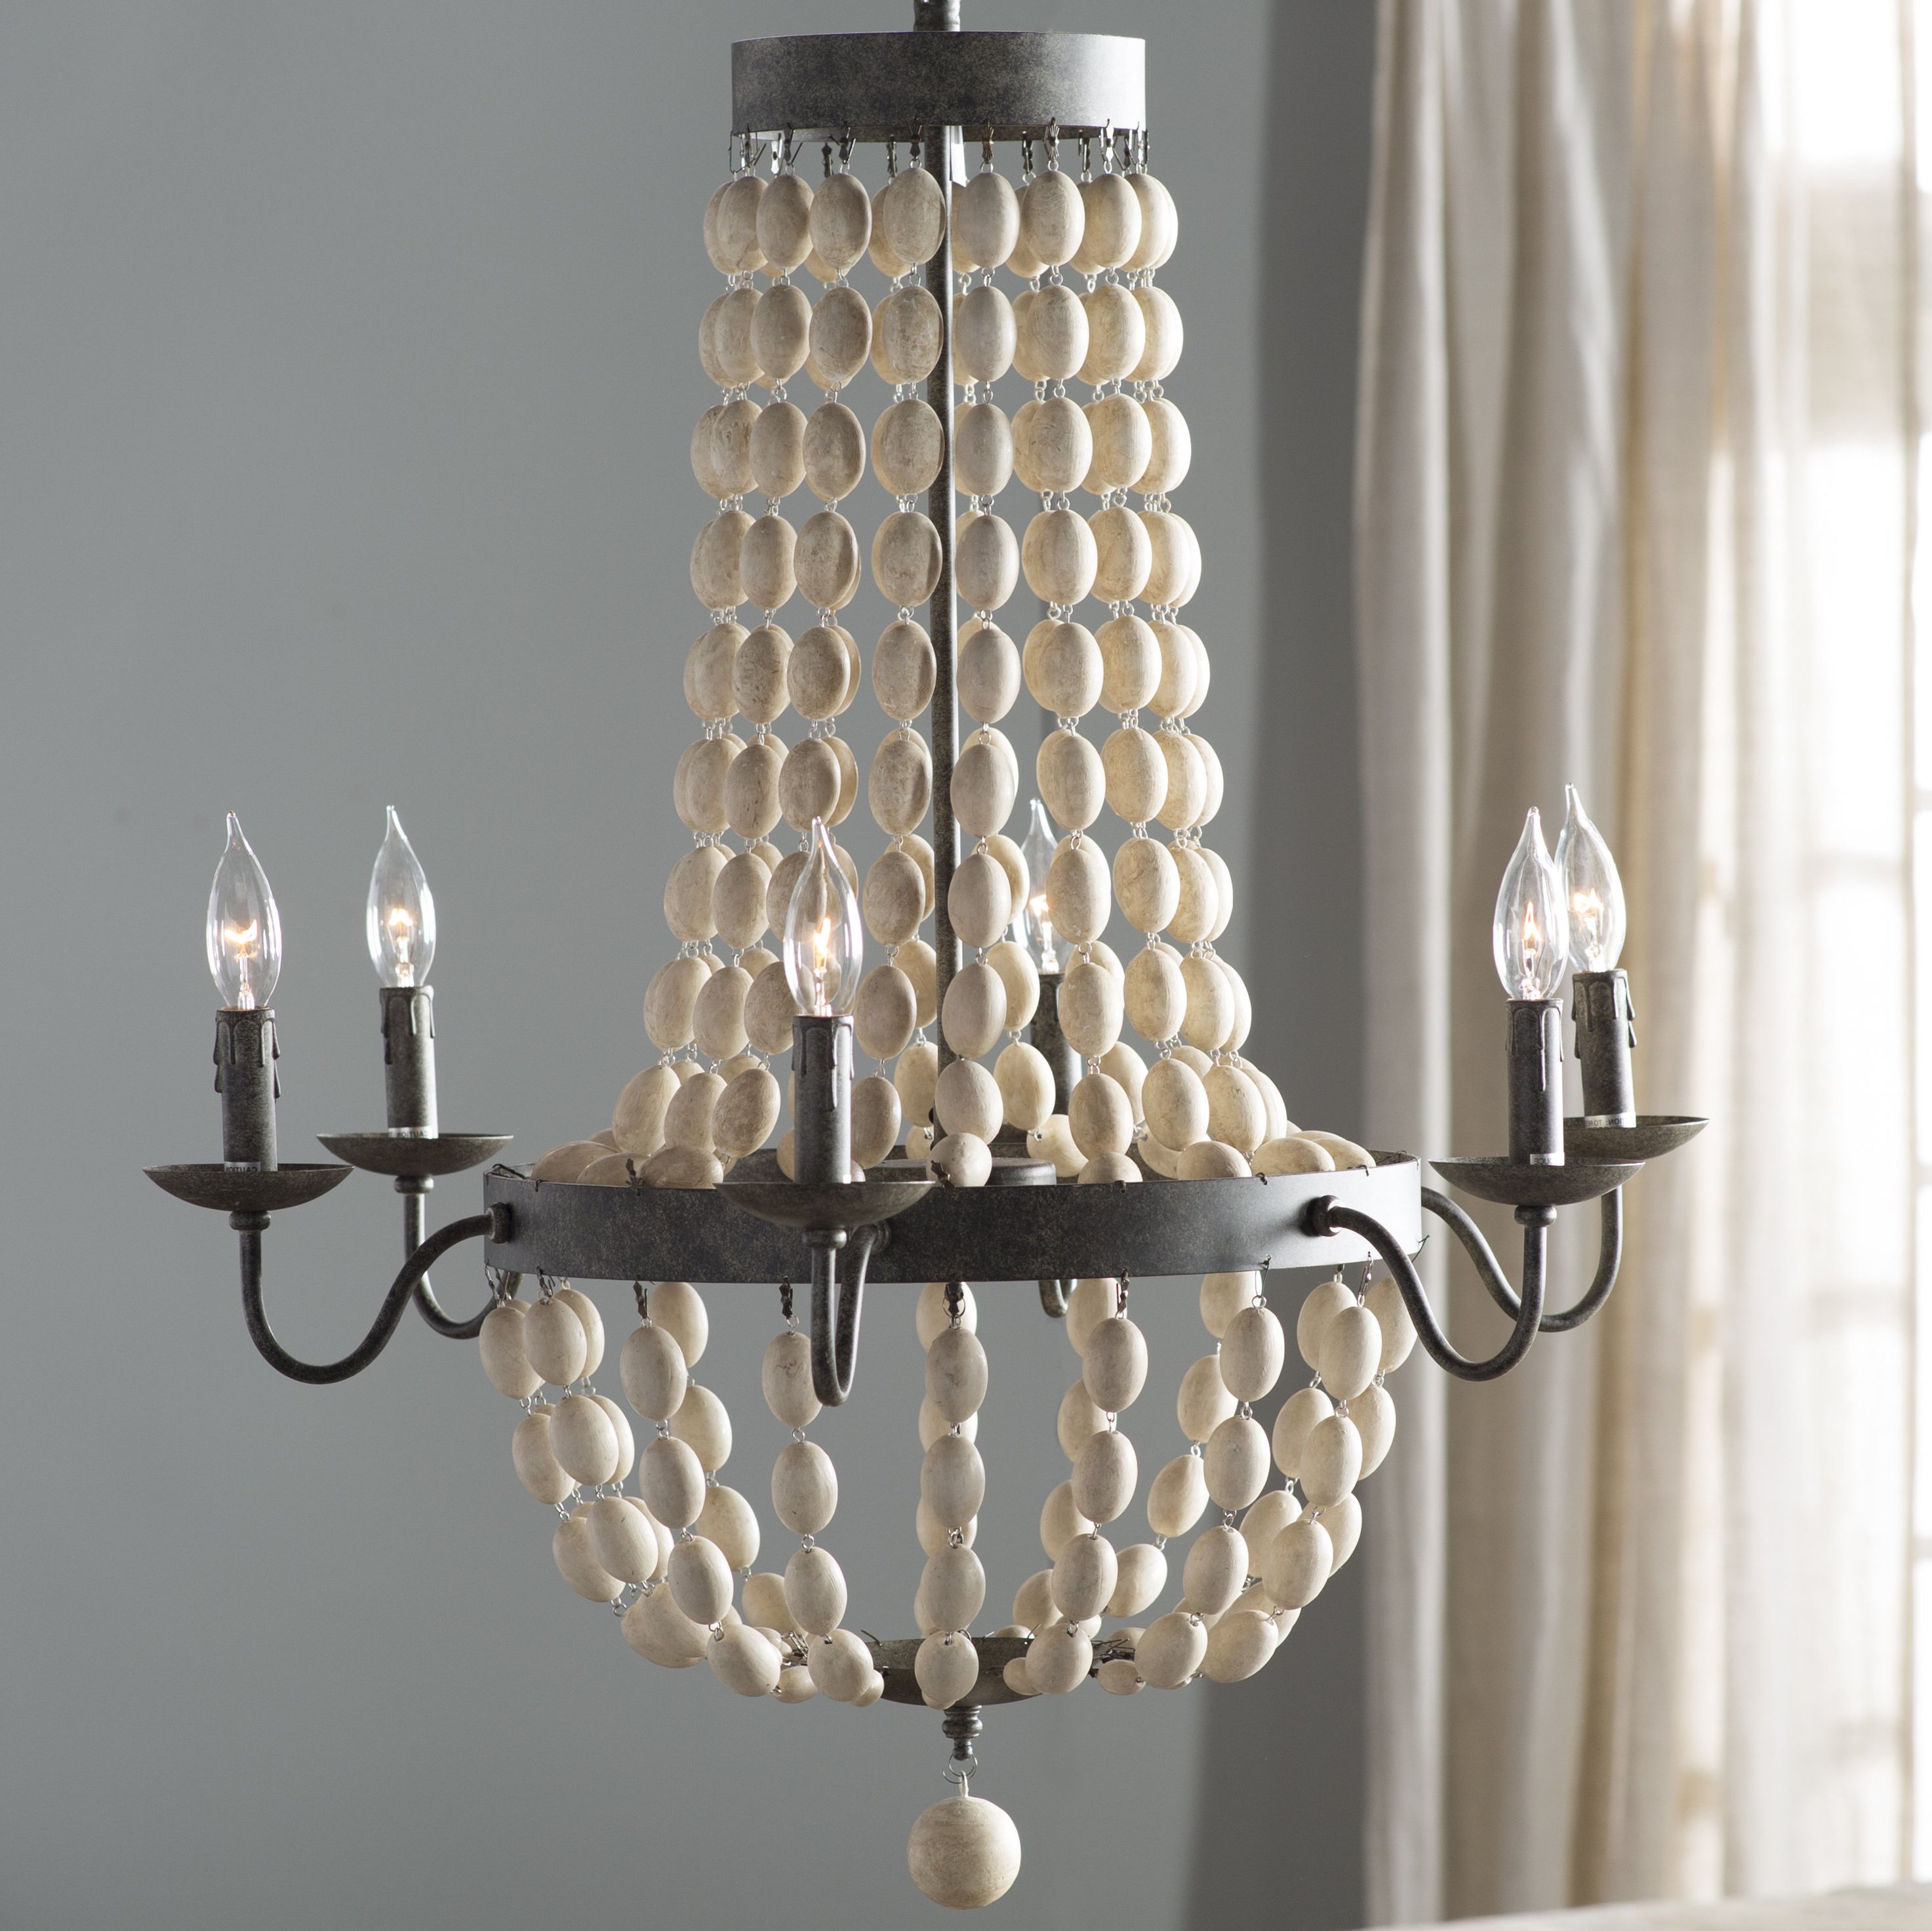 Bargas 6 Light Empire Chandelier Within Fashionable Ladonna 5 Light Novelty Chandeliers (View 8 of 25)